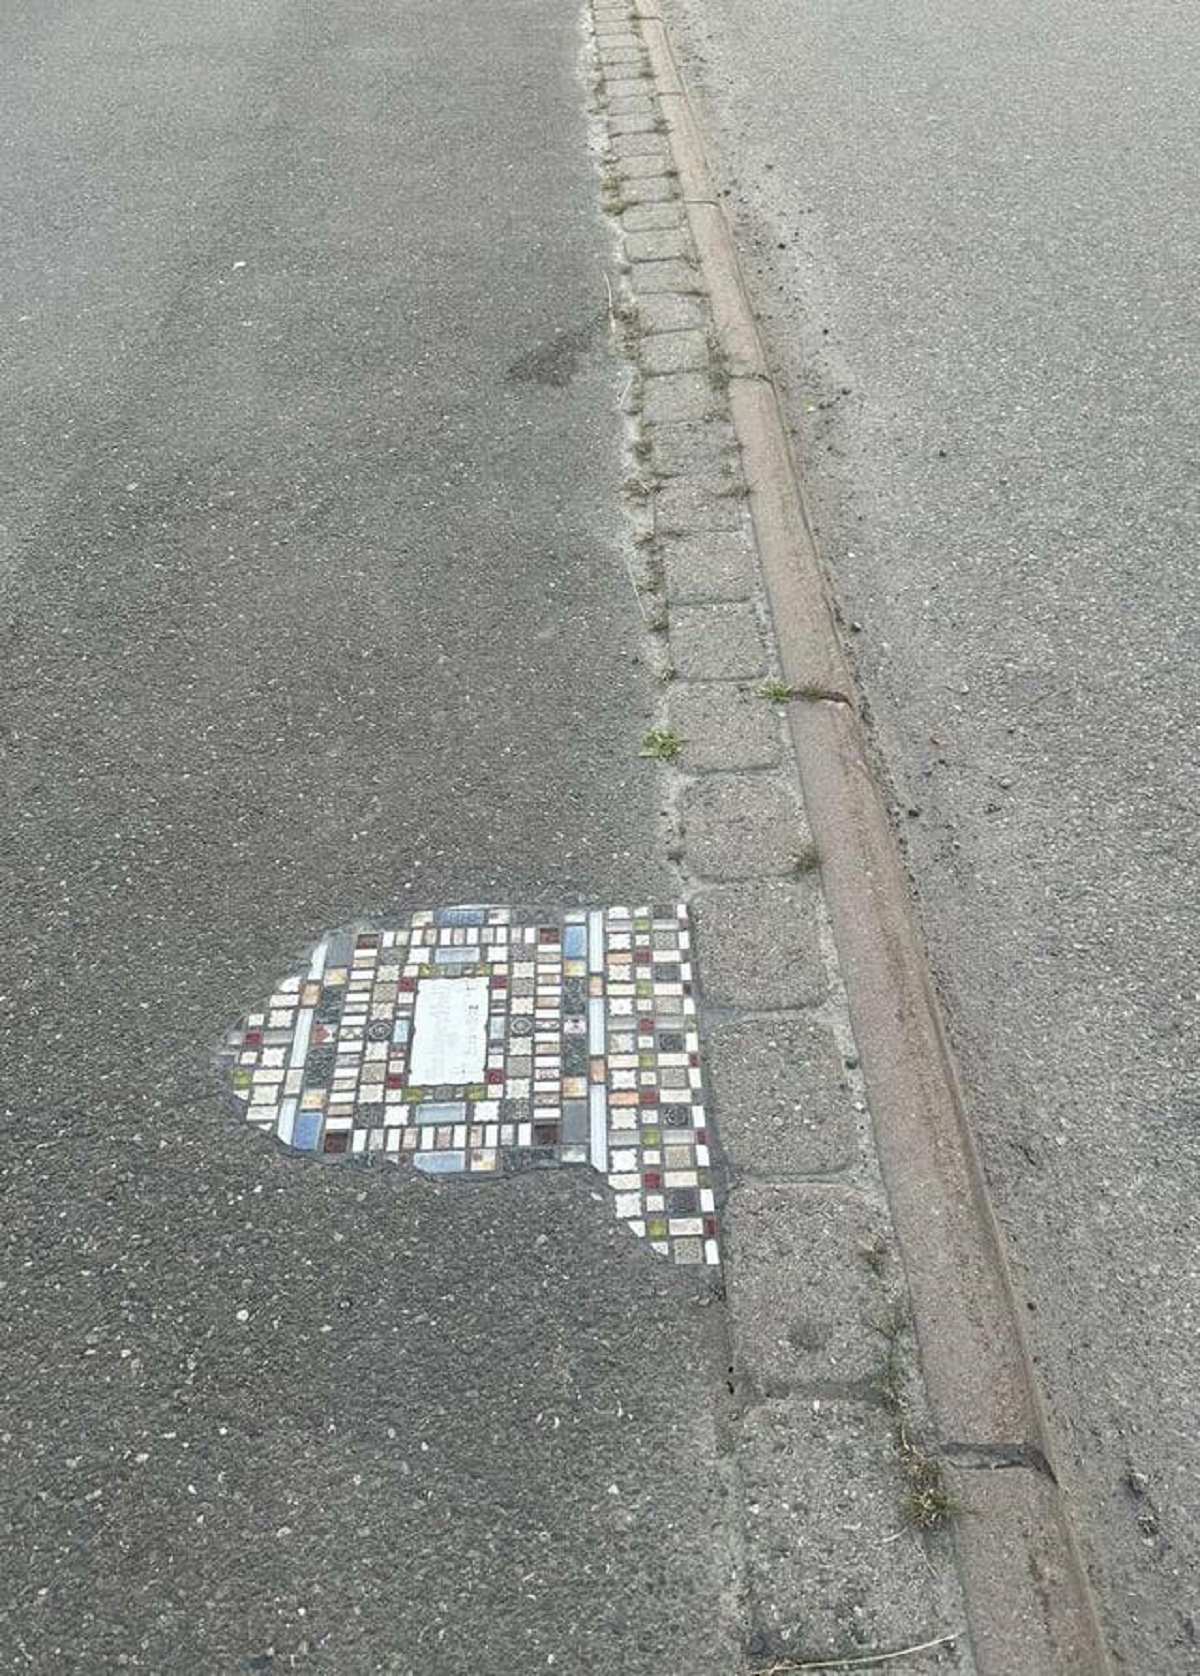 "My city has recently been filling small potholes with tiles like"